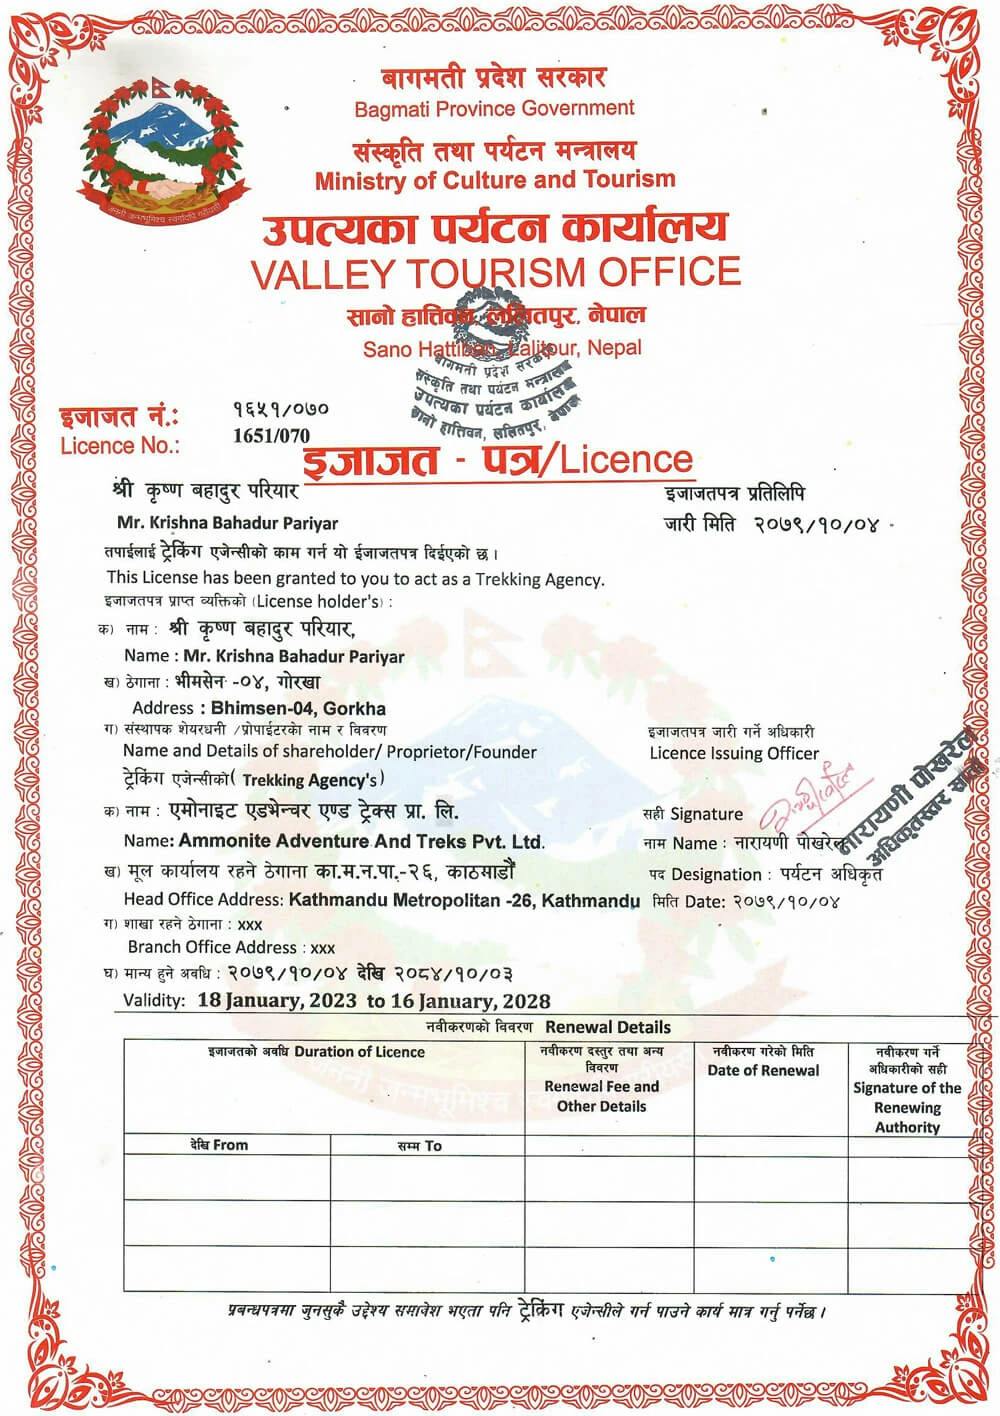 Certificate of Valley Tourism Office